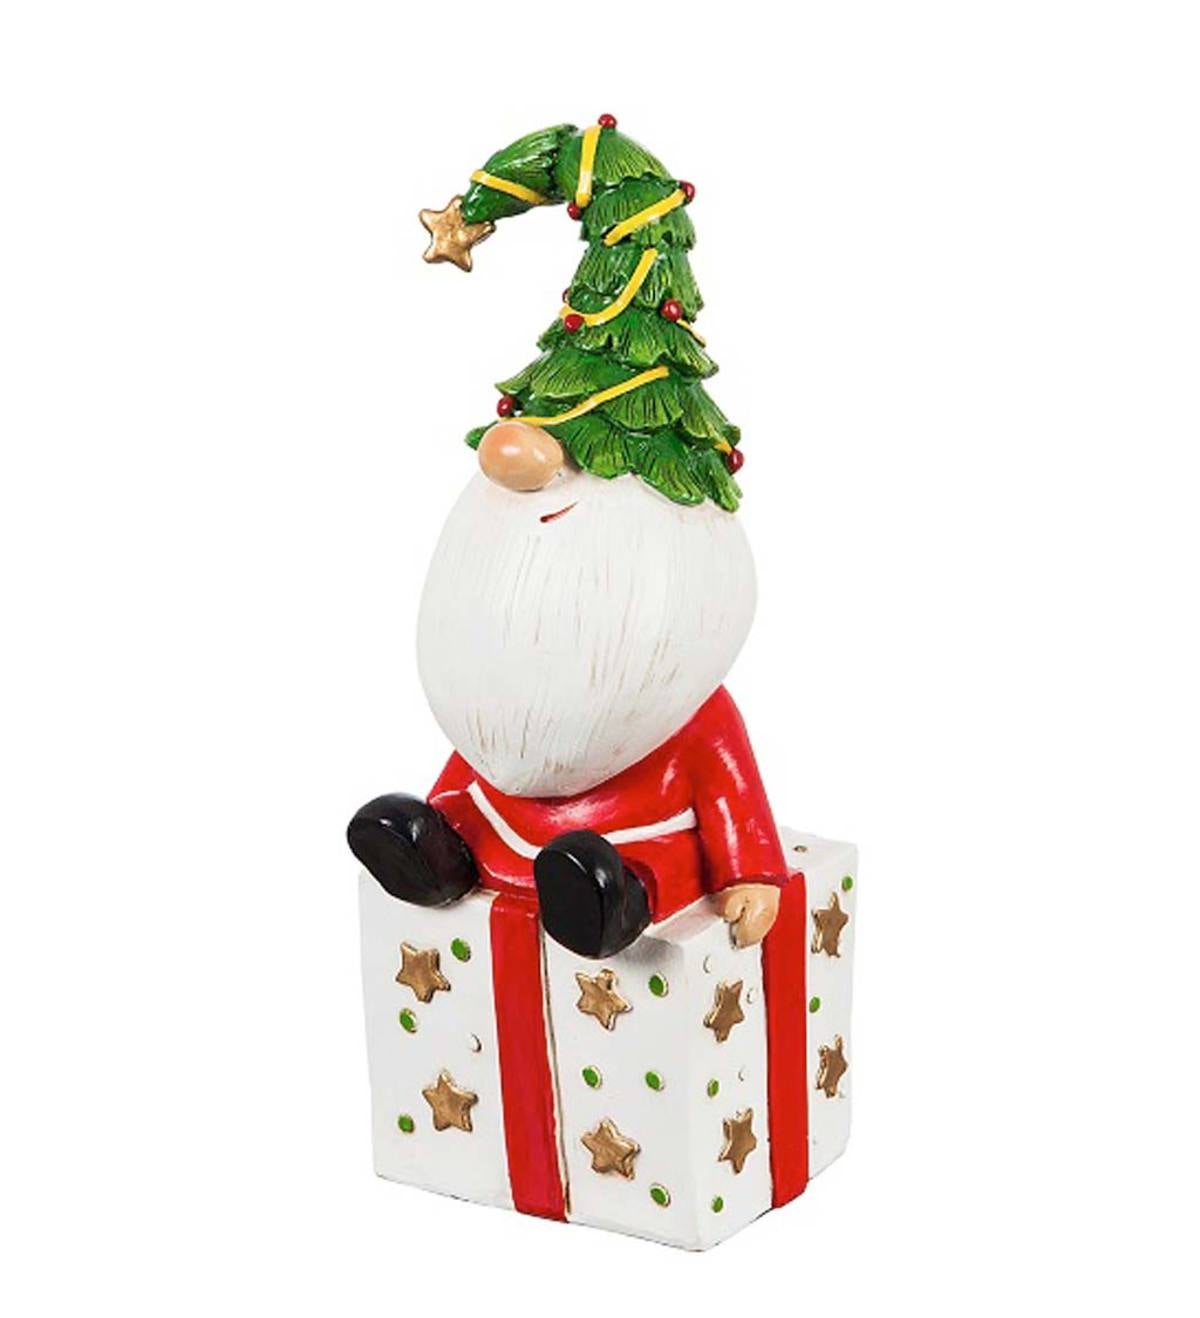 Garden Gnome with Christmas Tree Hat Statuary